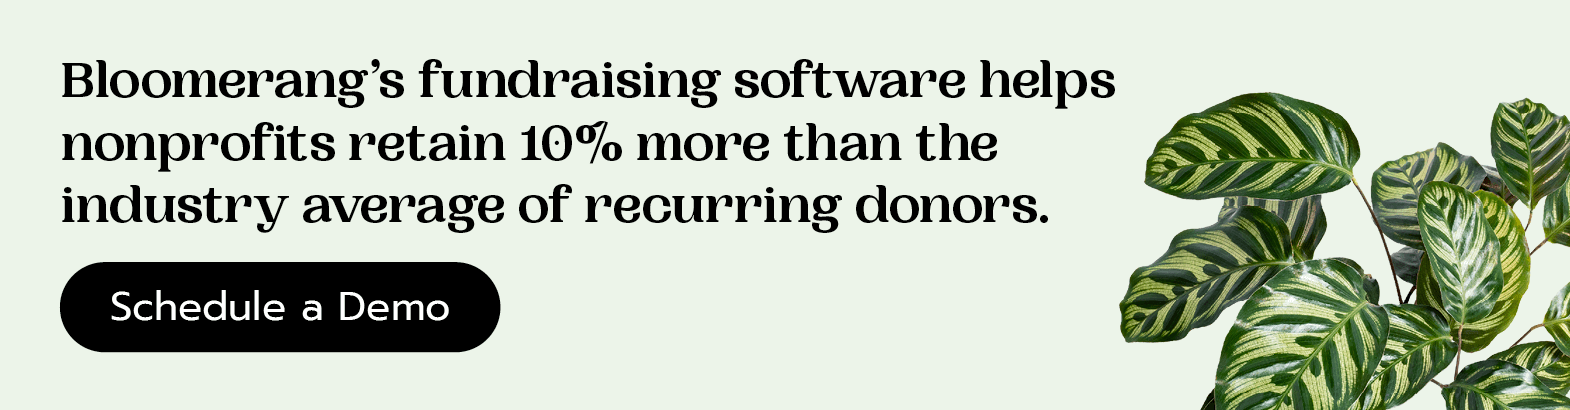 Bloomerang’s fundraising software helps nonprofits retain 10% more than the industry average of recurring donors. Schedule a demo here. 